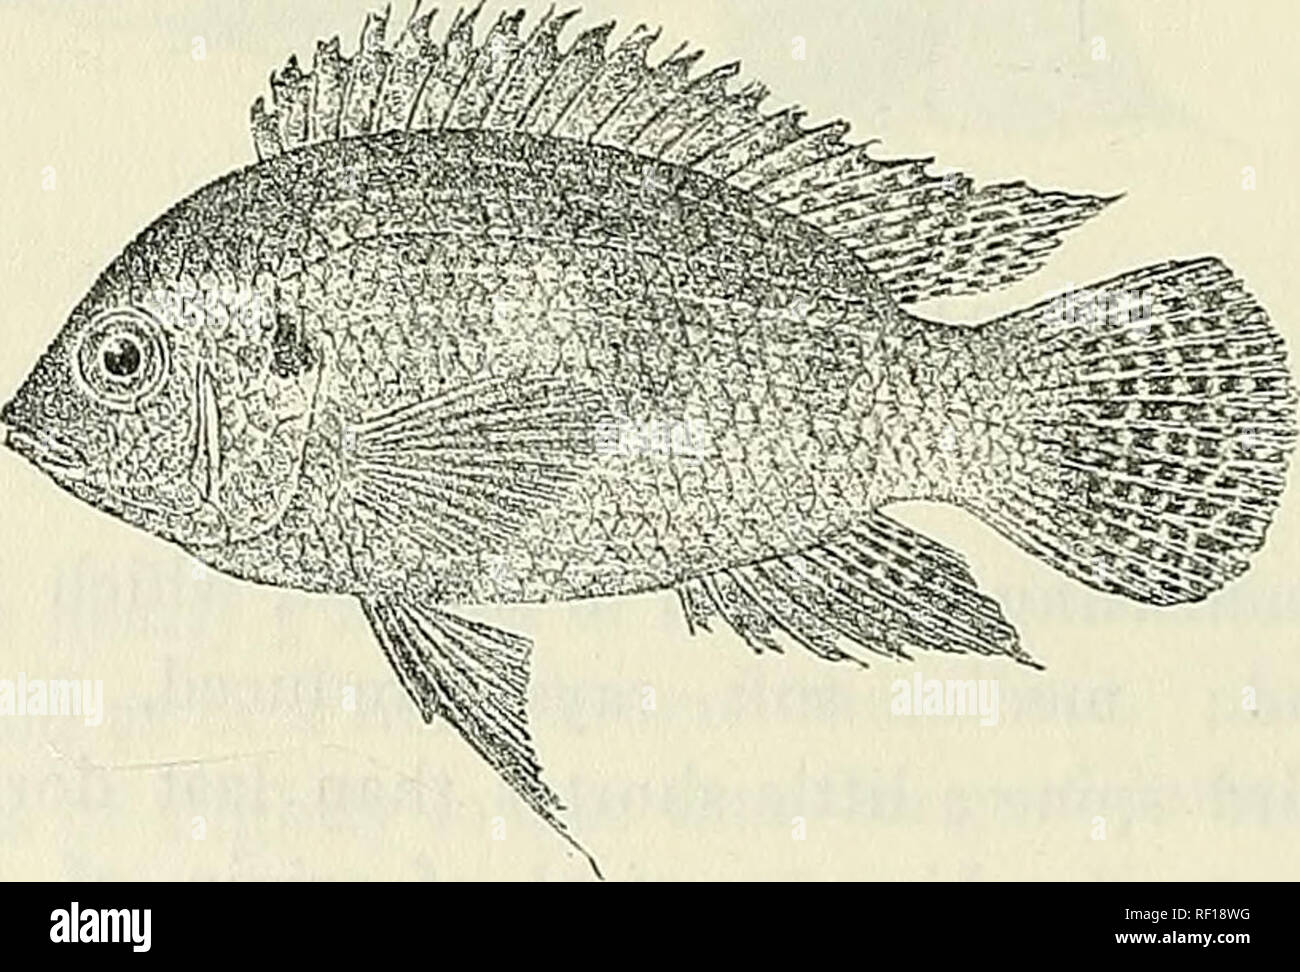 . Catalogue of the fresh-water fishes of Africa in the British Museum (Natural History). British Museum (Natural History); Fishes; Freshwater animals. 40G CICHLIDiE. 21. PELMATOCHROMIS ANSORGHI. Bouleng. Proc. Zool. Soc. 1901, i. p. 8, pi. iv. fig. 1 ; Pellegr. Mem. Soc. Zool. France, xvi. 1904, p. 282. Depth of body 2-g- to 2§ times in total length, length of head 2f to 3 times. Head 1§ to If- times as long as broad; snout rounded, with straight or slightly convex upper profile, broader than long, as long as eye, which is 3| to 3§ times in length of head, 1-J times in inter- orbital width, an Stock Photo